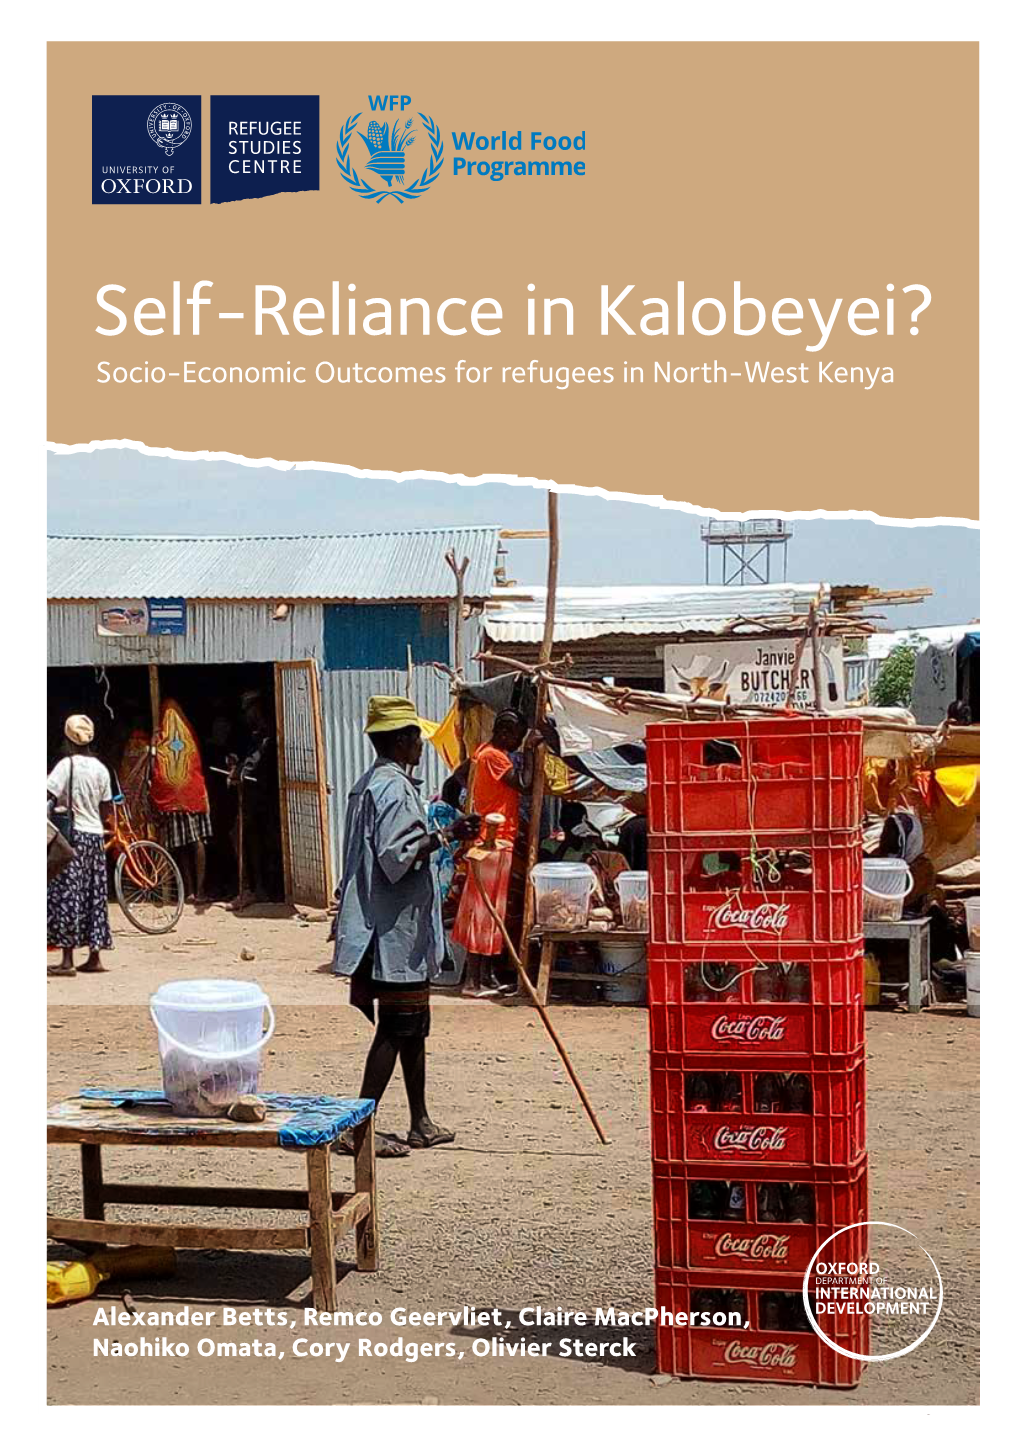 Self-Reliance in Kalobeyei? Socio-Economic Outcomes for Refugees in North-West Kenya